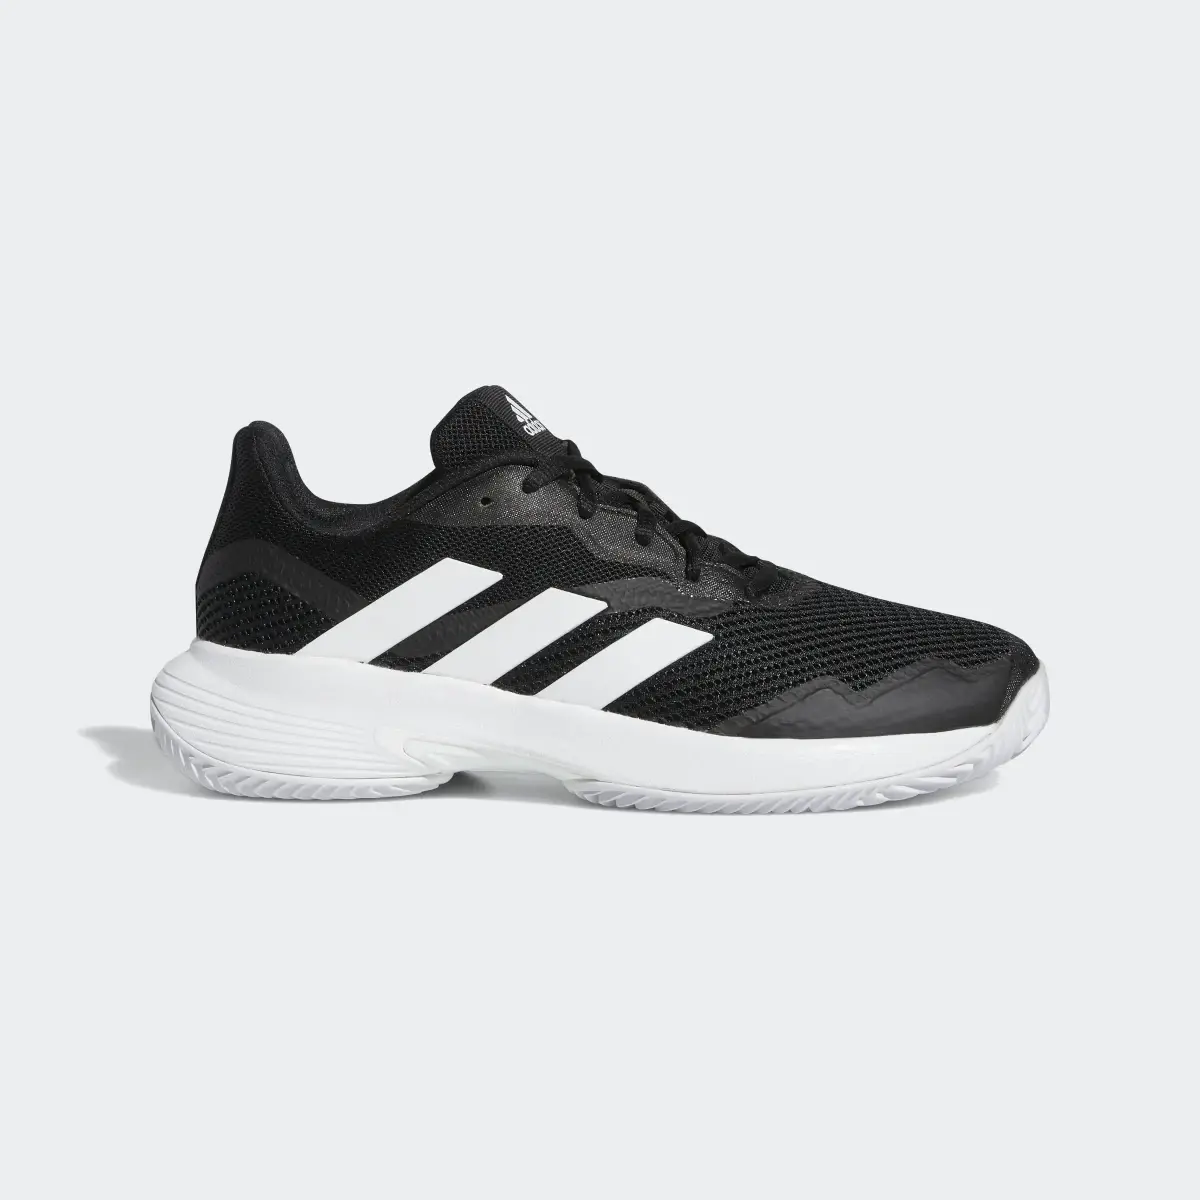 Adidas CourtJam Control Clay Tennis Shoes. 2